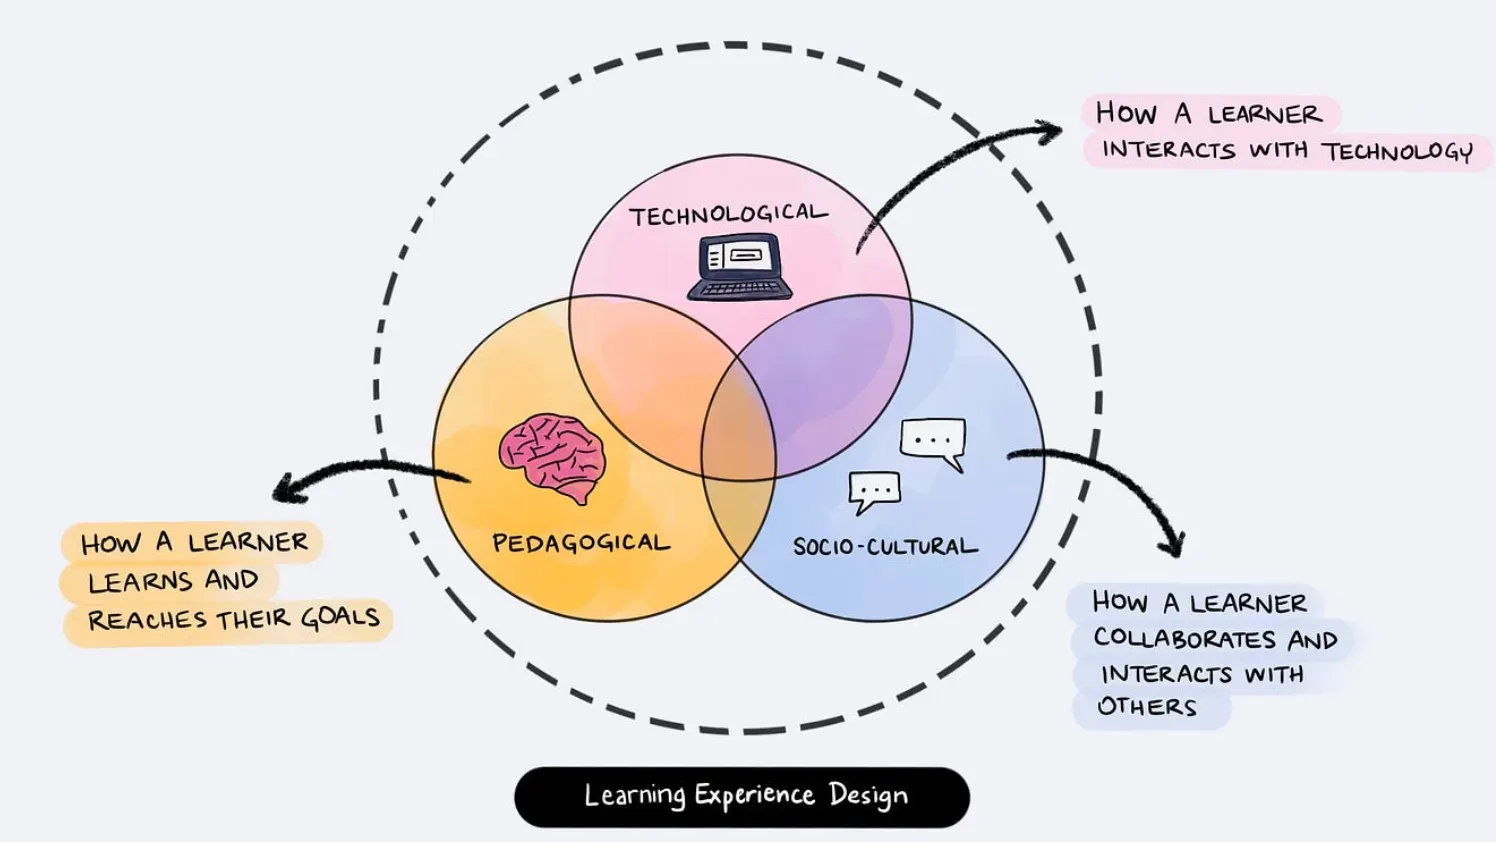 Where is Experience Design Applied?